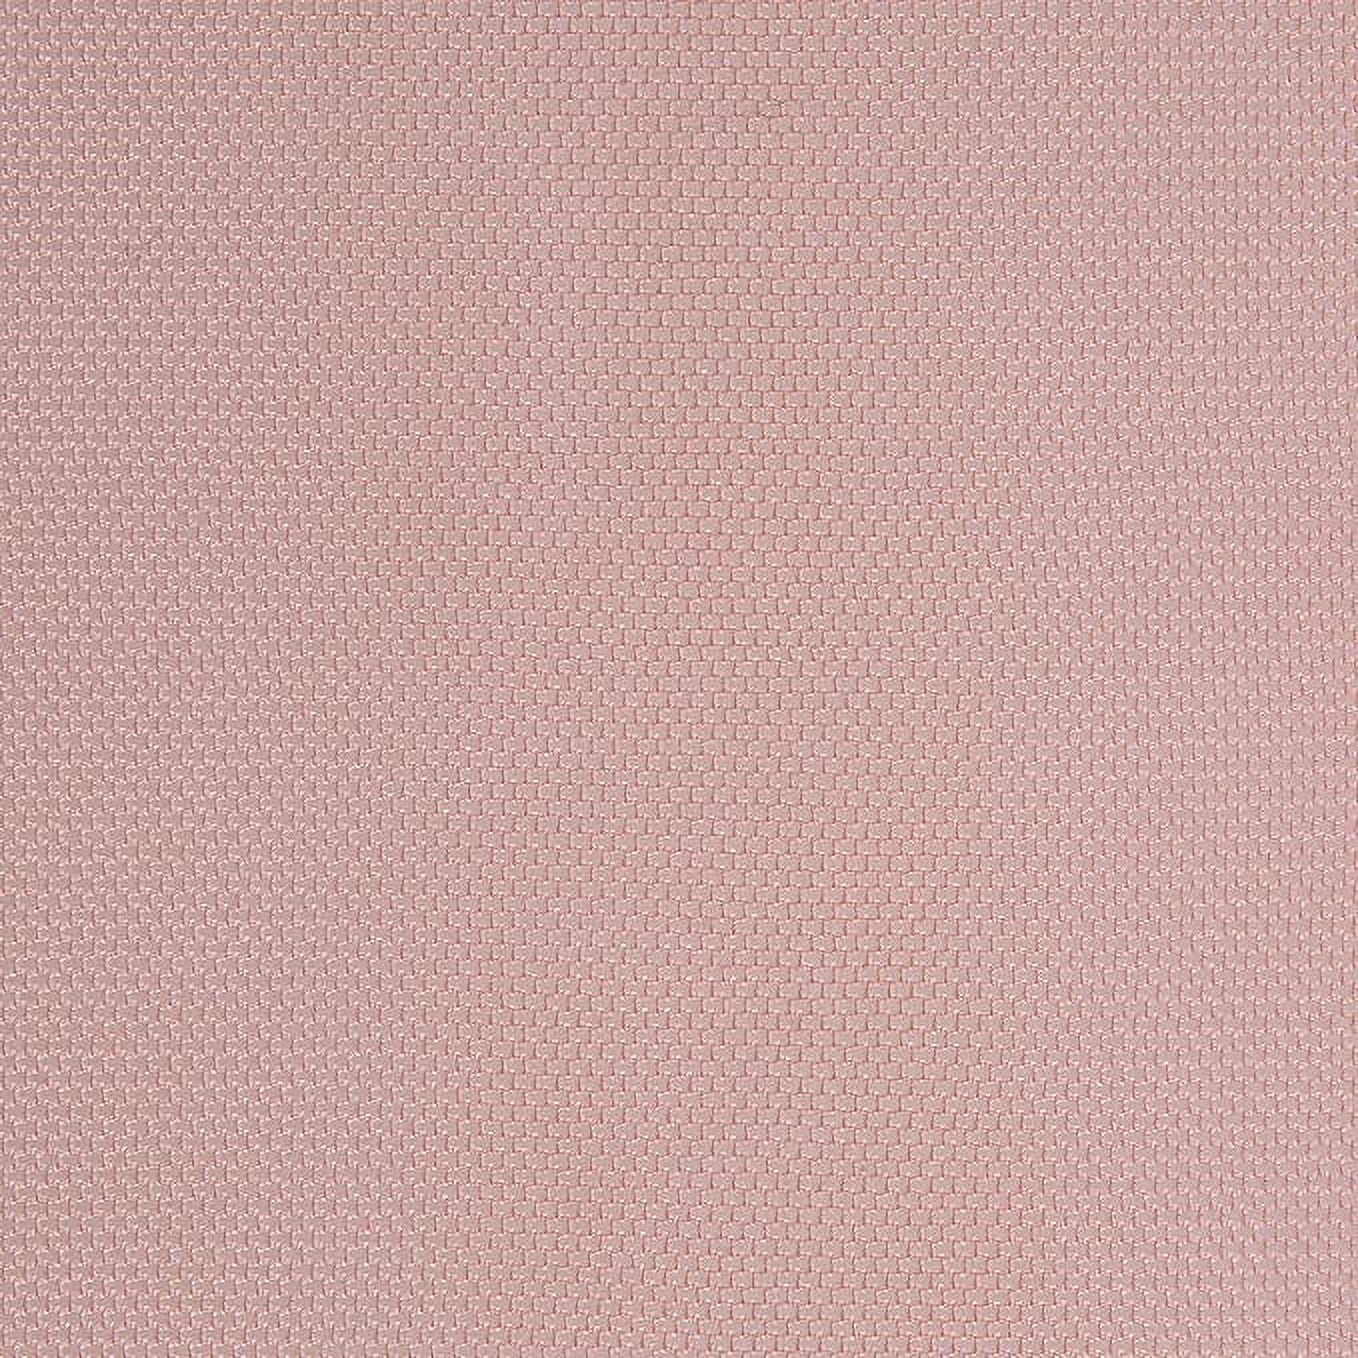 FabricLA Power Mesh Fabric Nylon Spandex - 60 Inches (150 cm) Wide - Use  Mesh Fabric for Sewing, Sports Wear, Ballet, Workout Tights, Garments -  Mesh